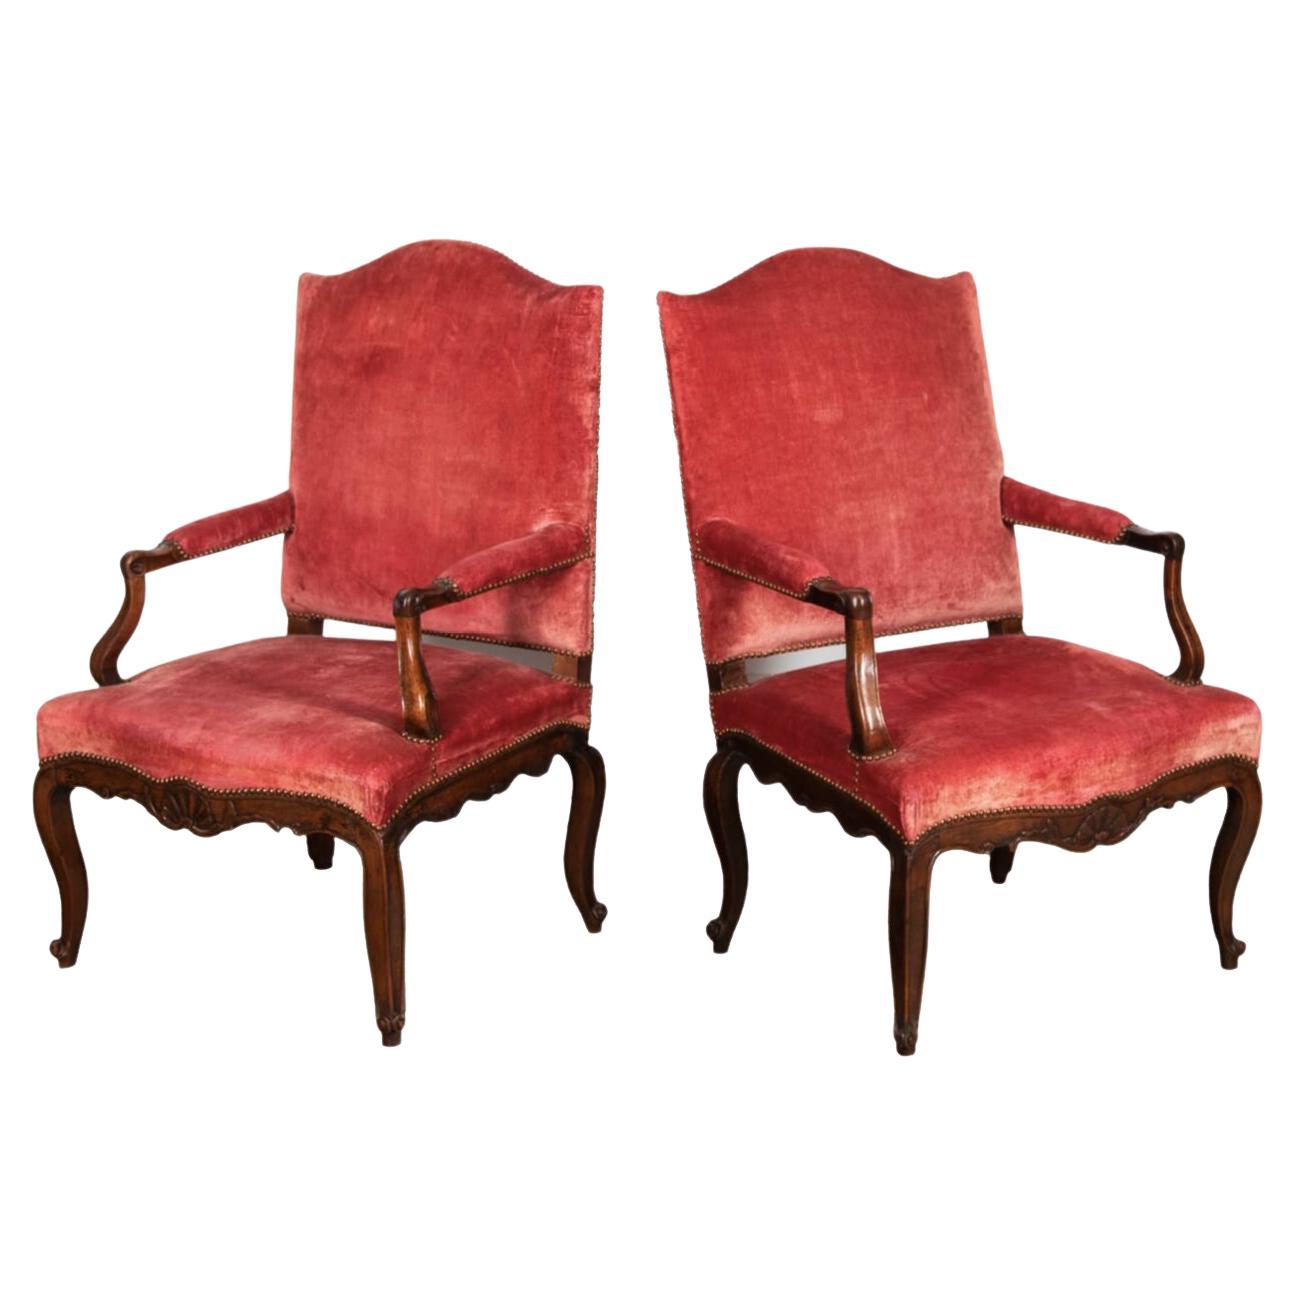 Pair of French Walnut and Velvet 18th Century Elbow Chairs